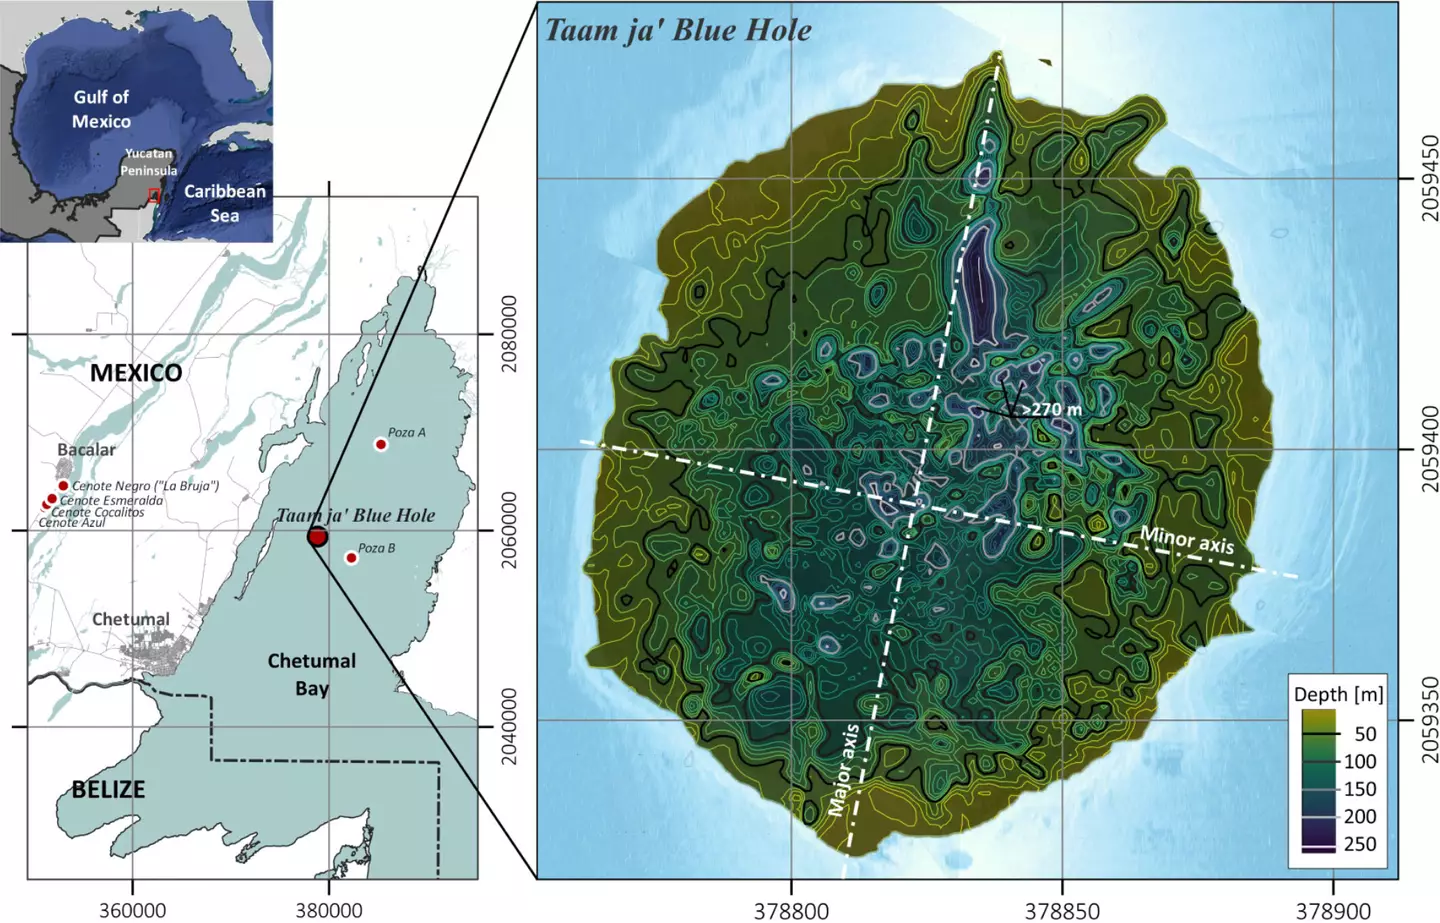 A map showing the full extent of the Taam ja' blue hole in Chetumal.